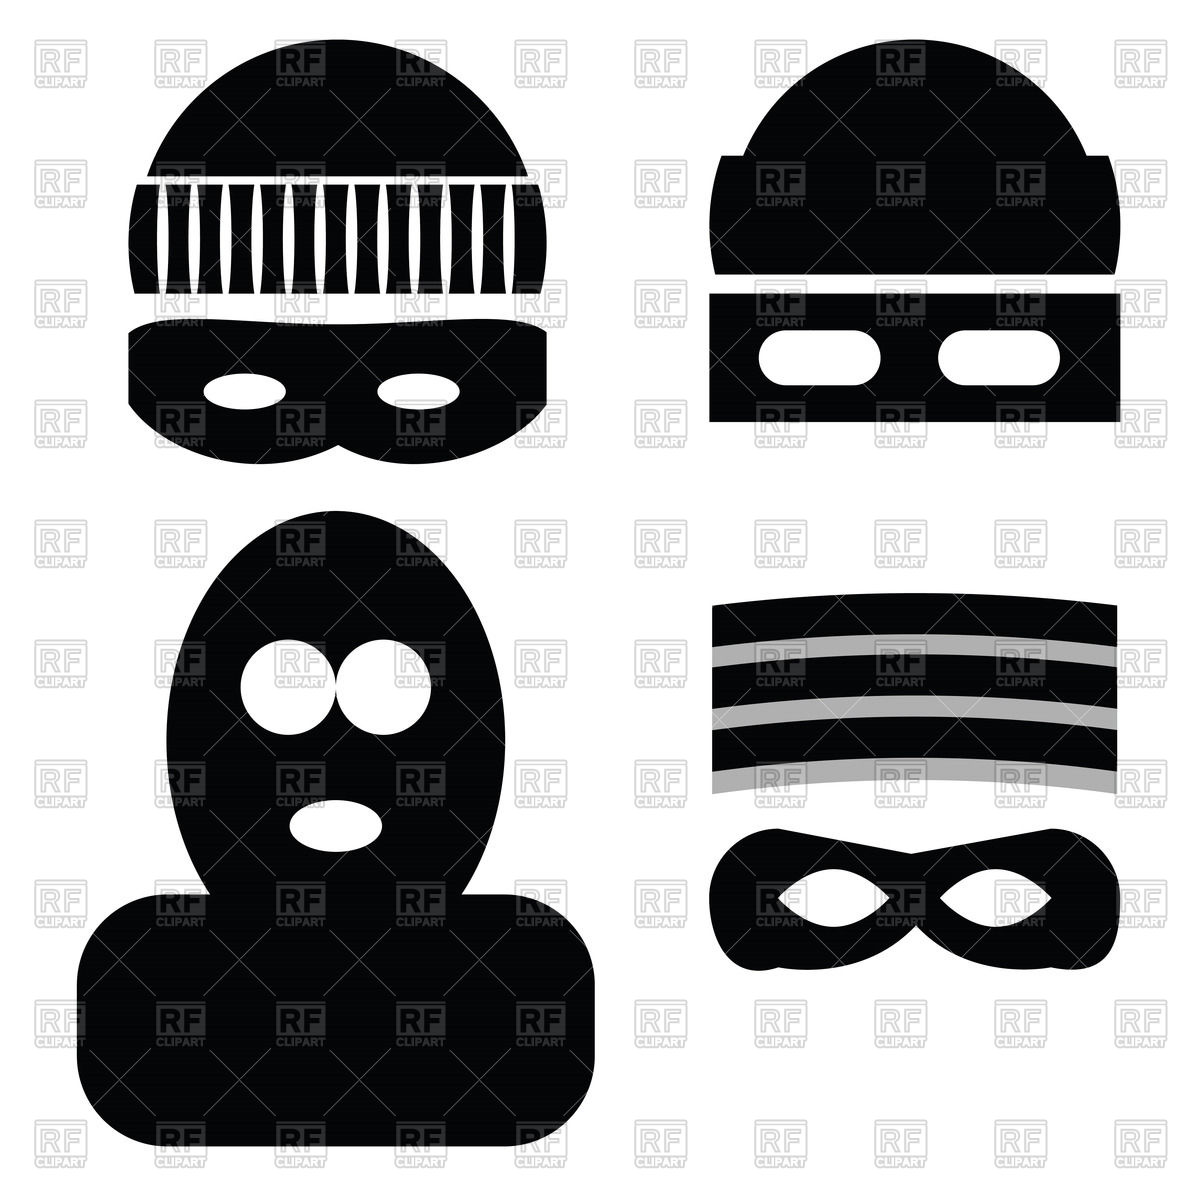 Thief Mask Icons 63649 Download Royalty Free Vector Clipart  Eps